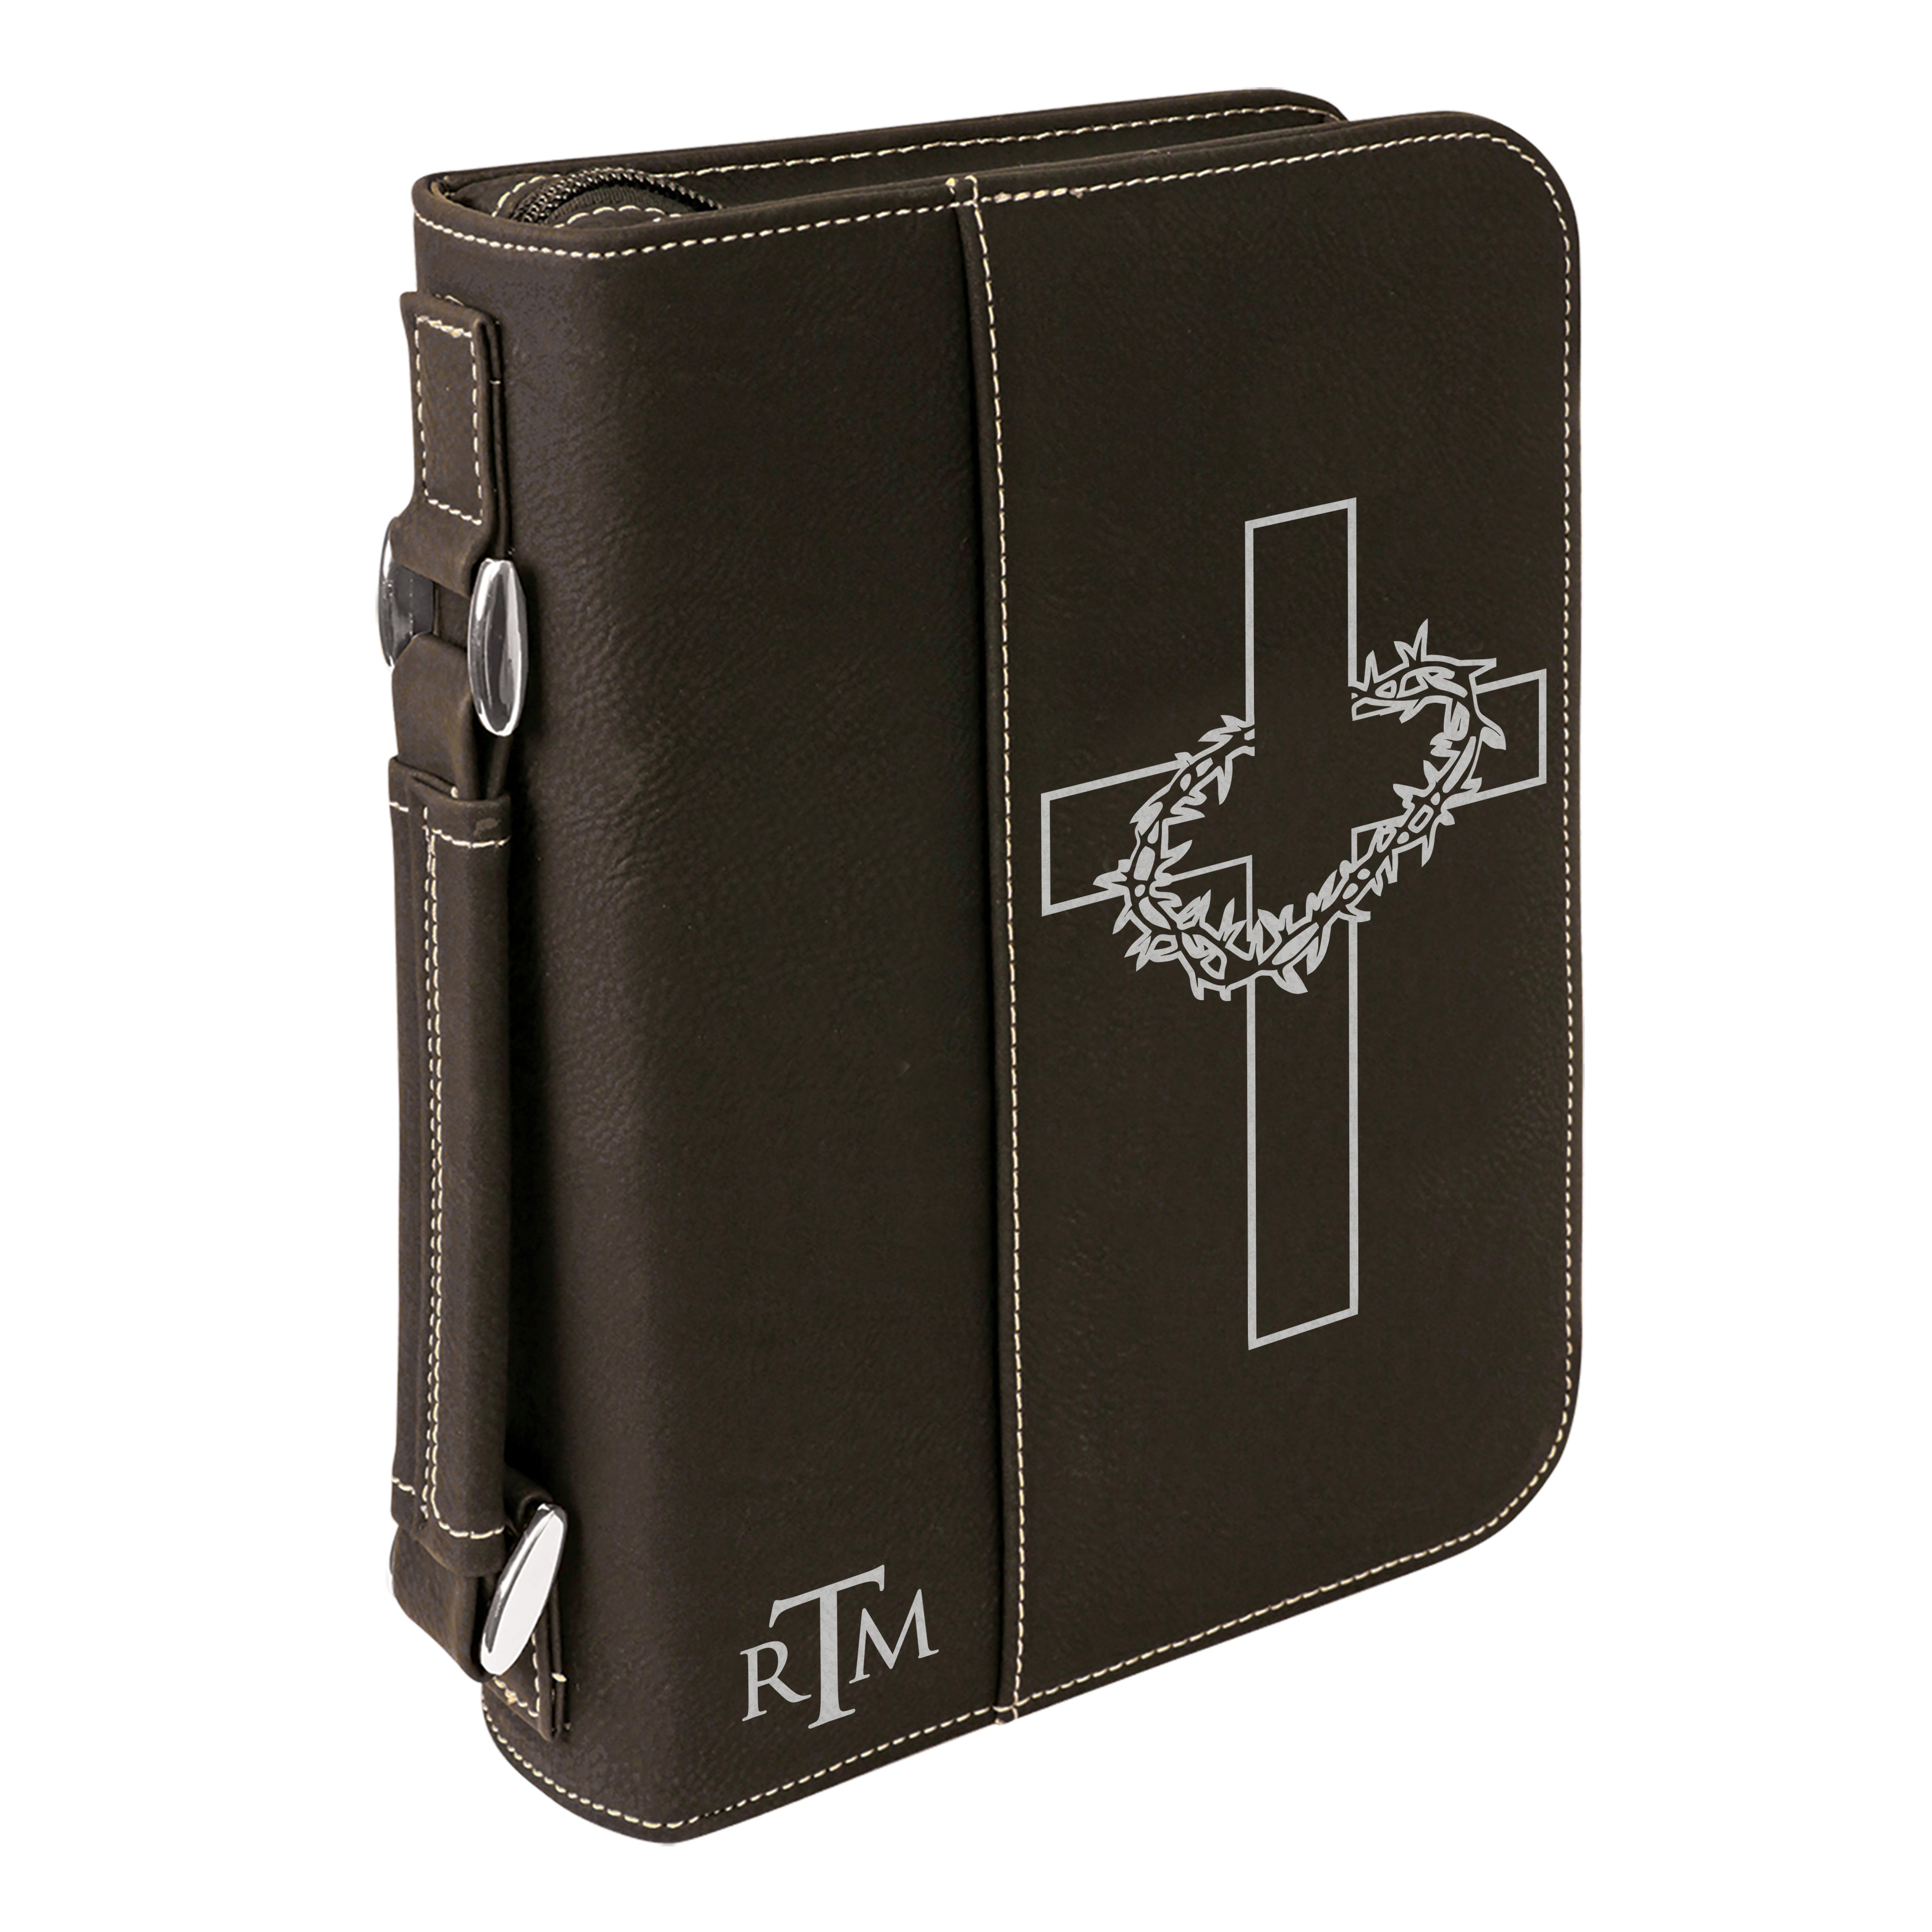 Purse-Style Blessed in Black Bible Cover - Crown Bookshop